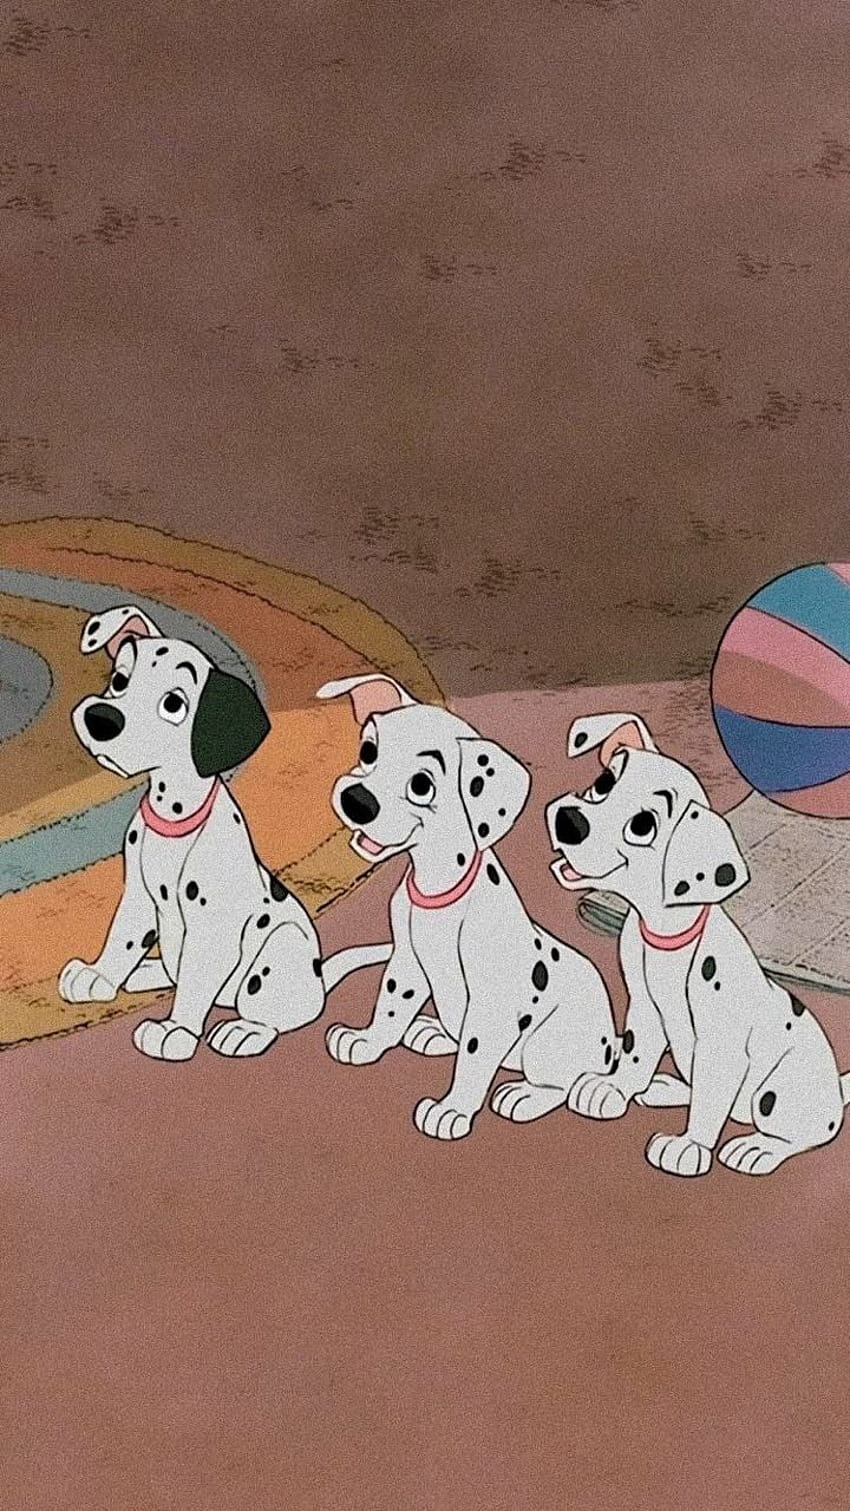 This is my fight song, one hundred and one dalmatians HD phone wallpaper